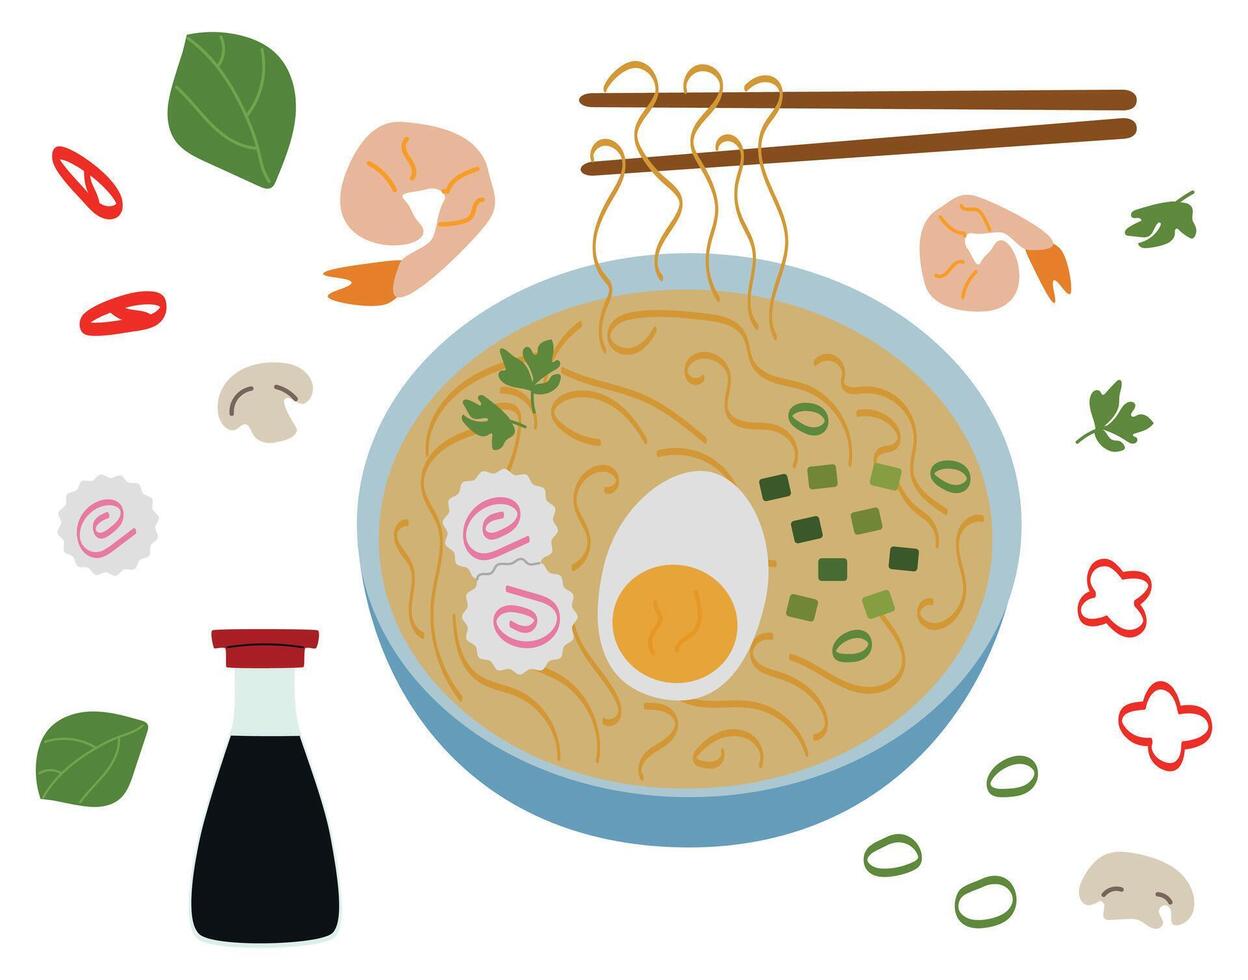 Bowl of ramen, vector illustration of Asian noodle soup with broth, delicious ethnic dish with boiled egg, shrimp and mushrooms, delicious noodles, Korean and Chinese cuisine, isolated